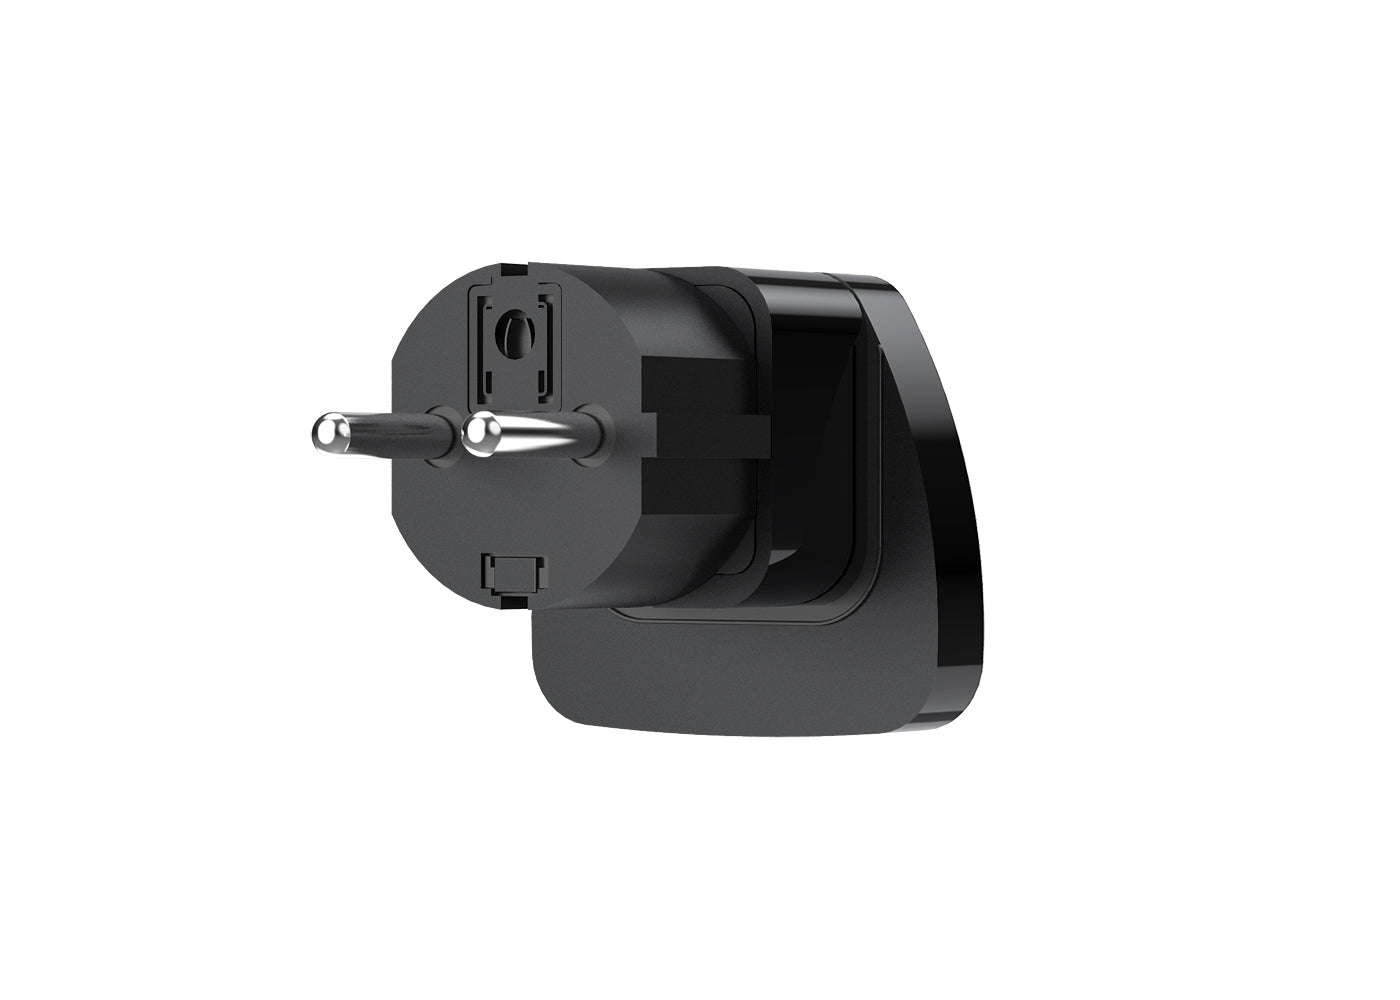 Universal Power Adapter for Europe (Large)